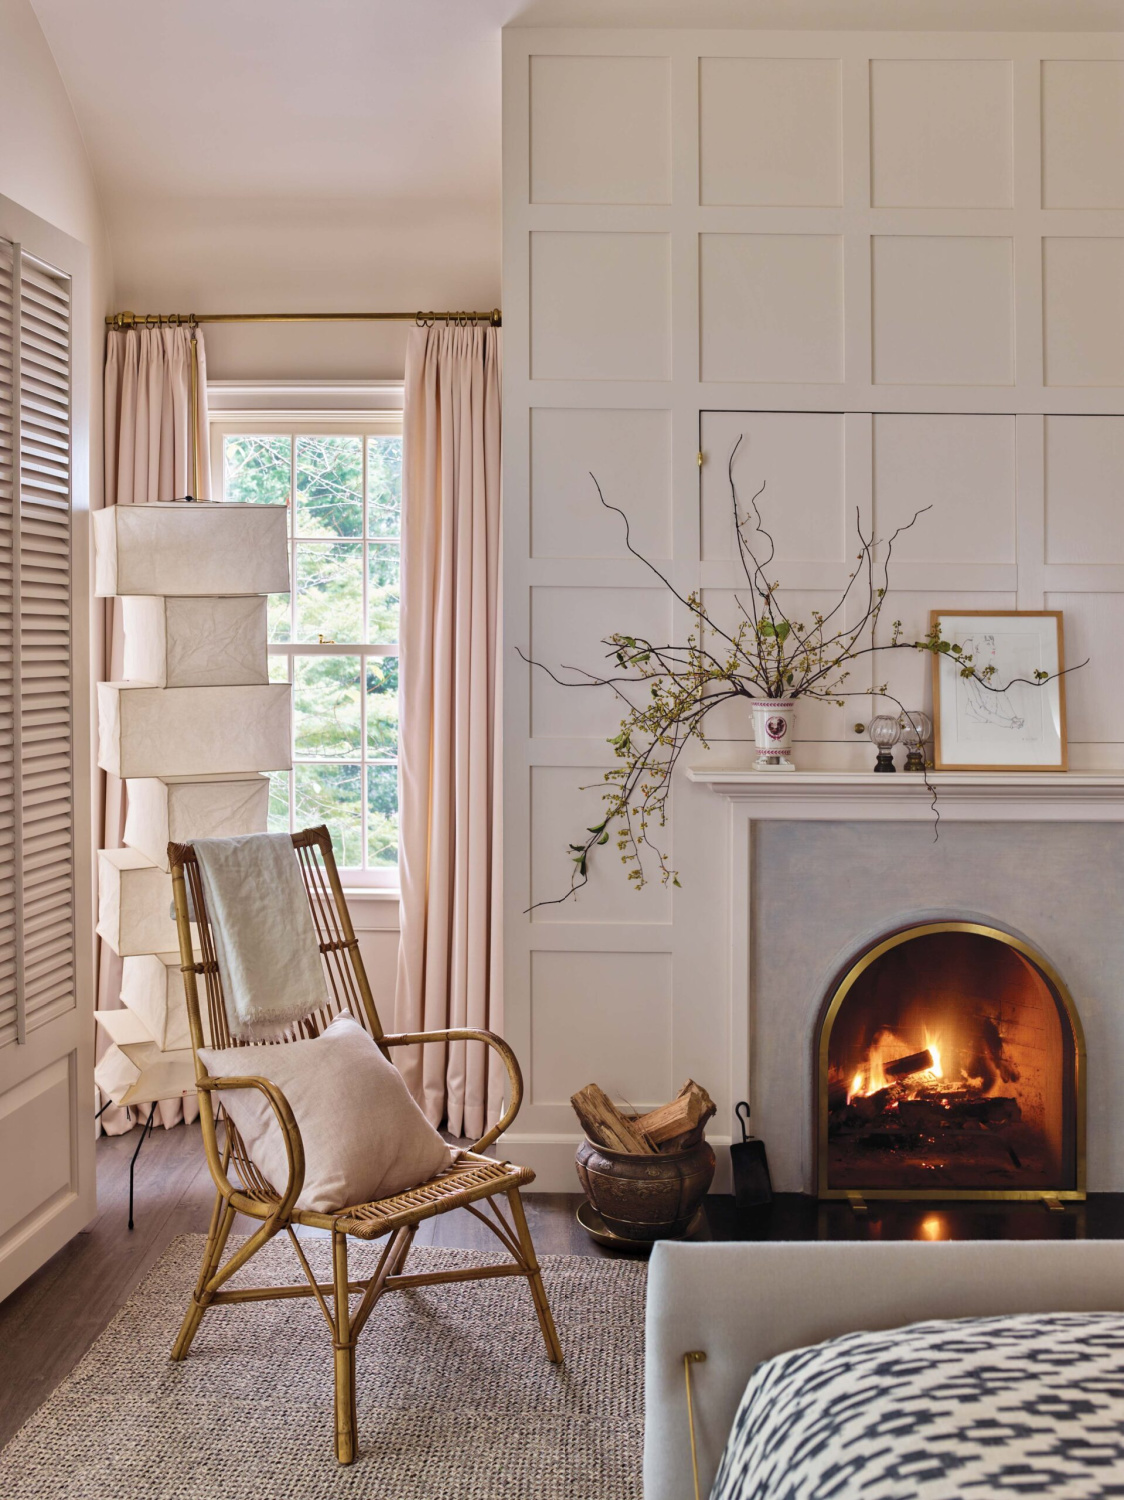 Beautiful architectural details in a bedroom with fireplace - Stanley Dixon & Carolyn Malone. Photo: Eric Piasecki.